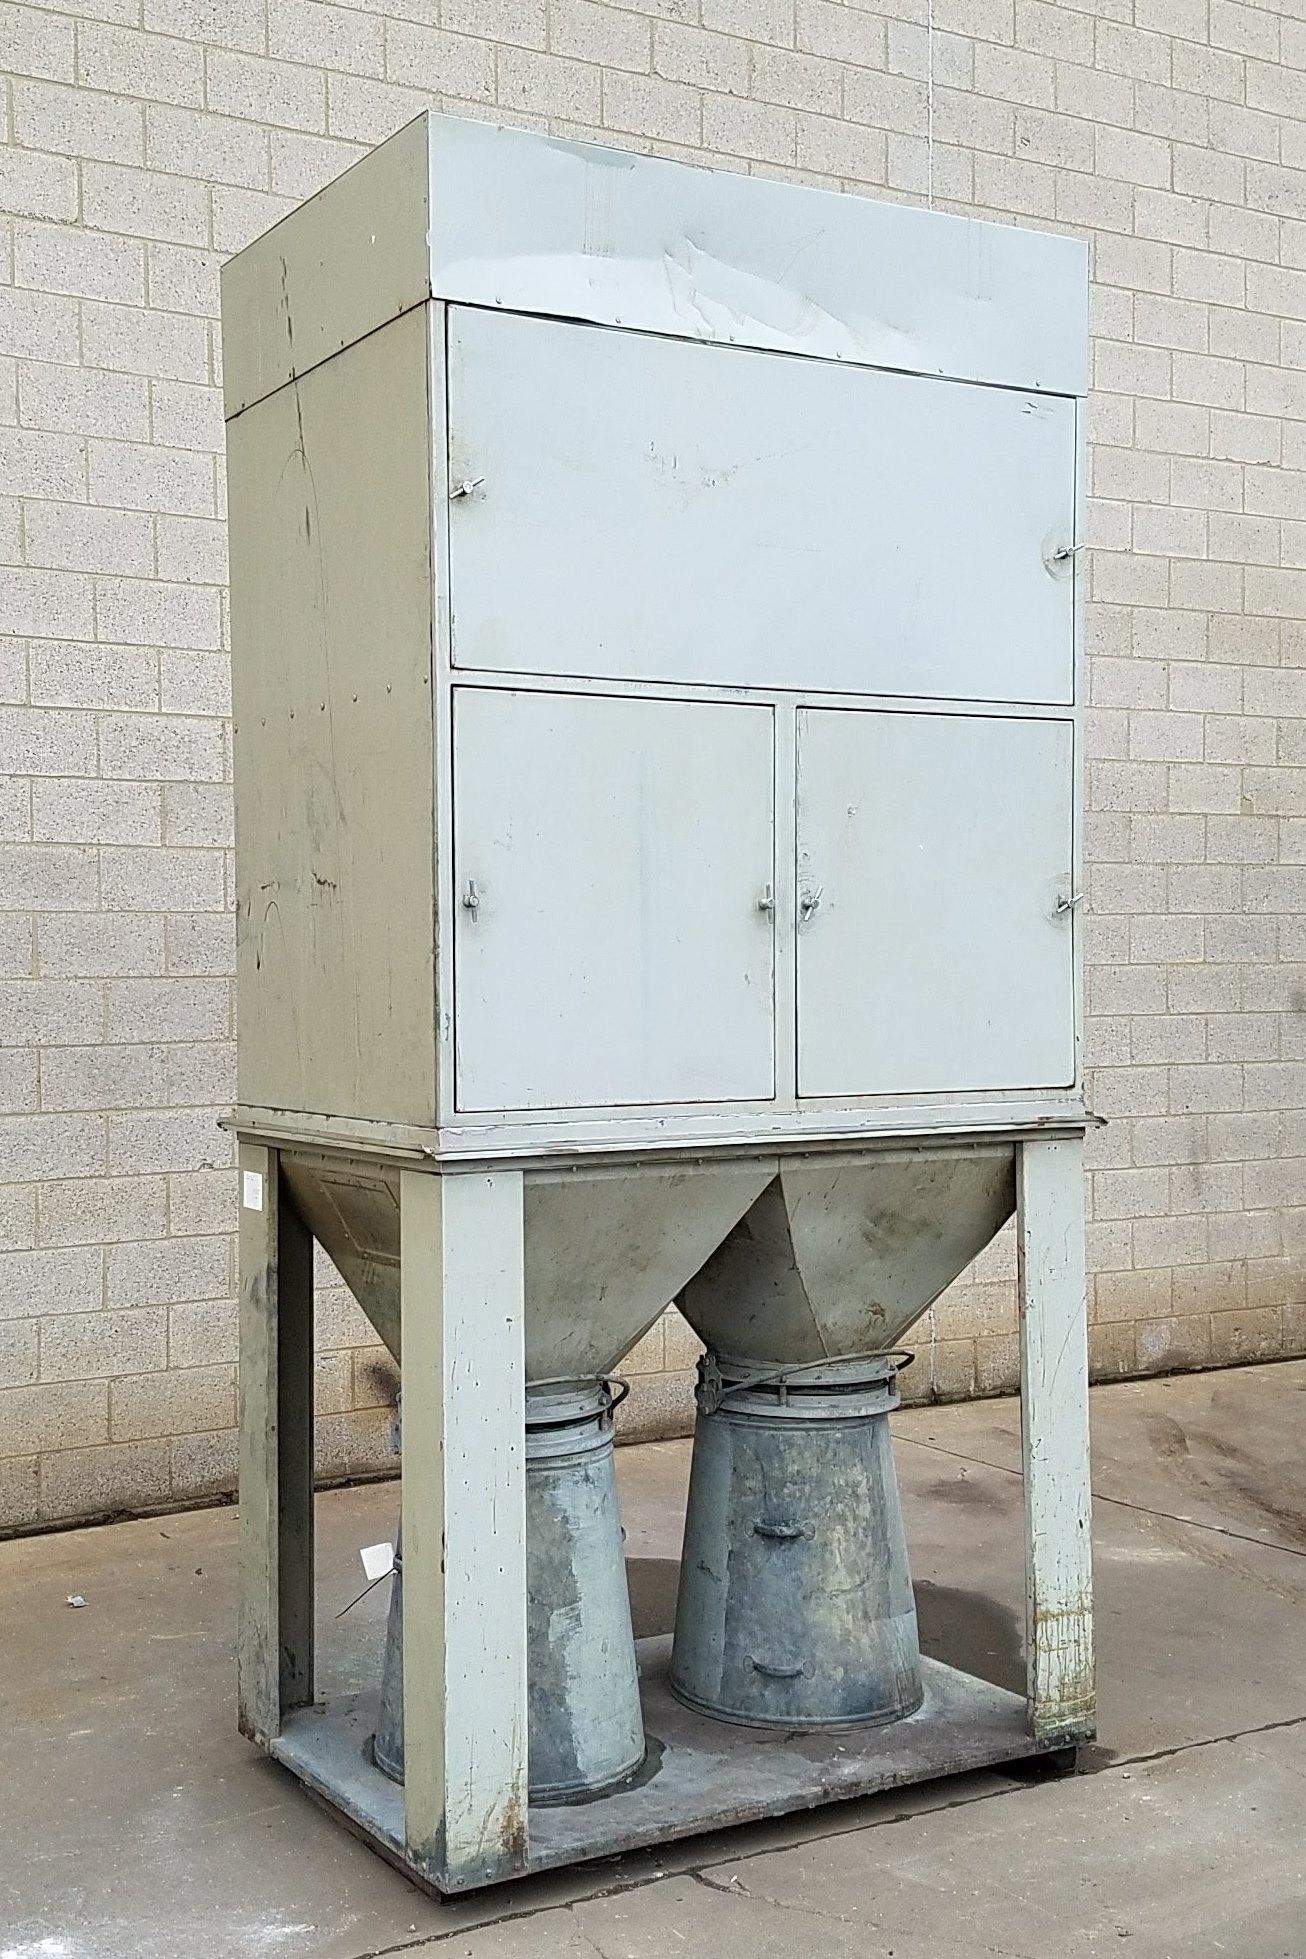 3,000 cfm DCE #UMA458 Baghouse Dust Collector - SOLD